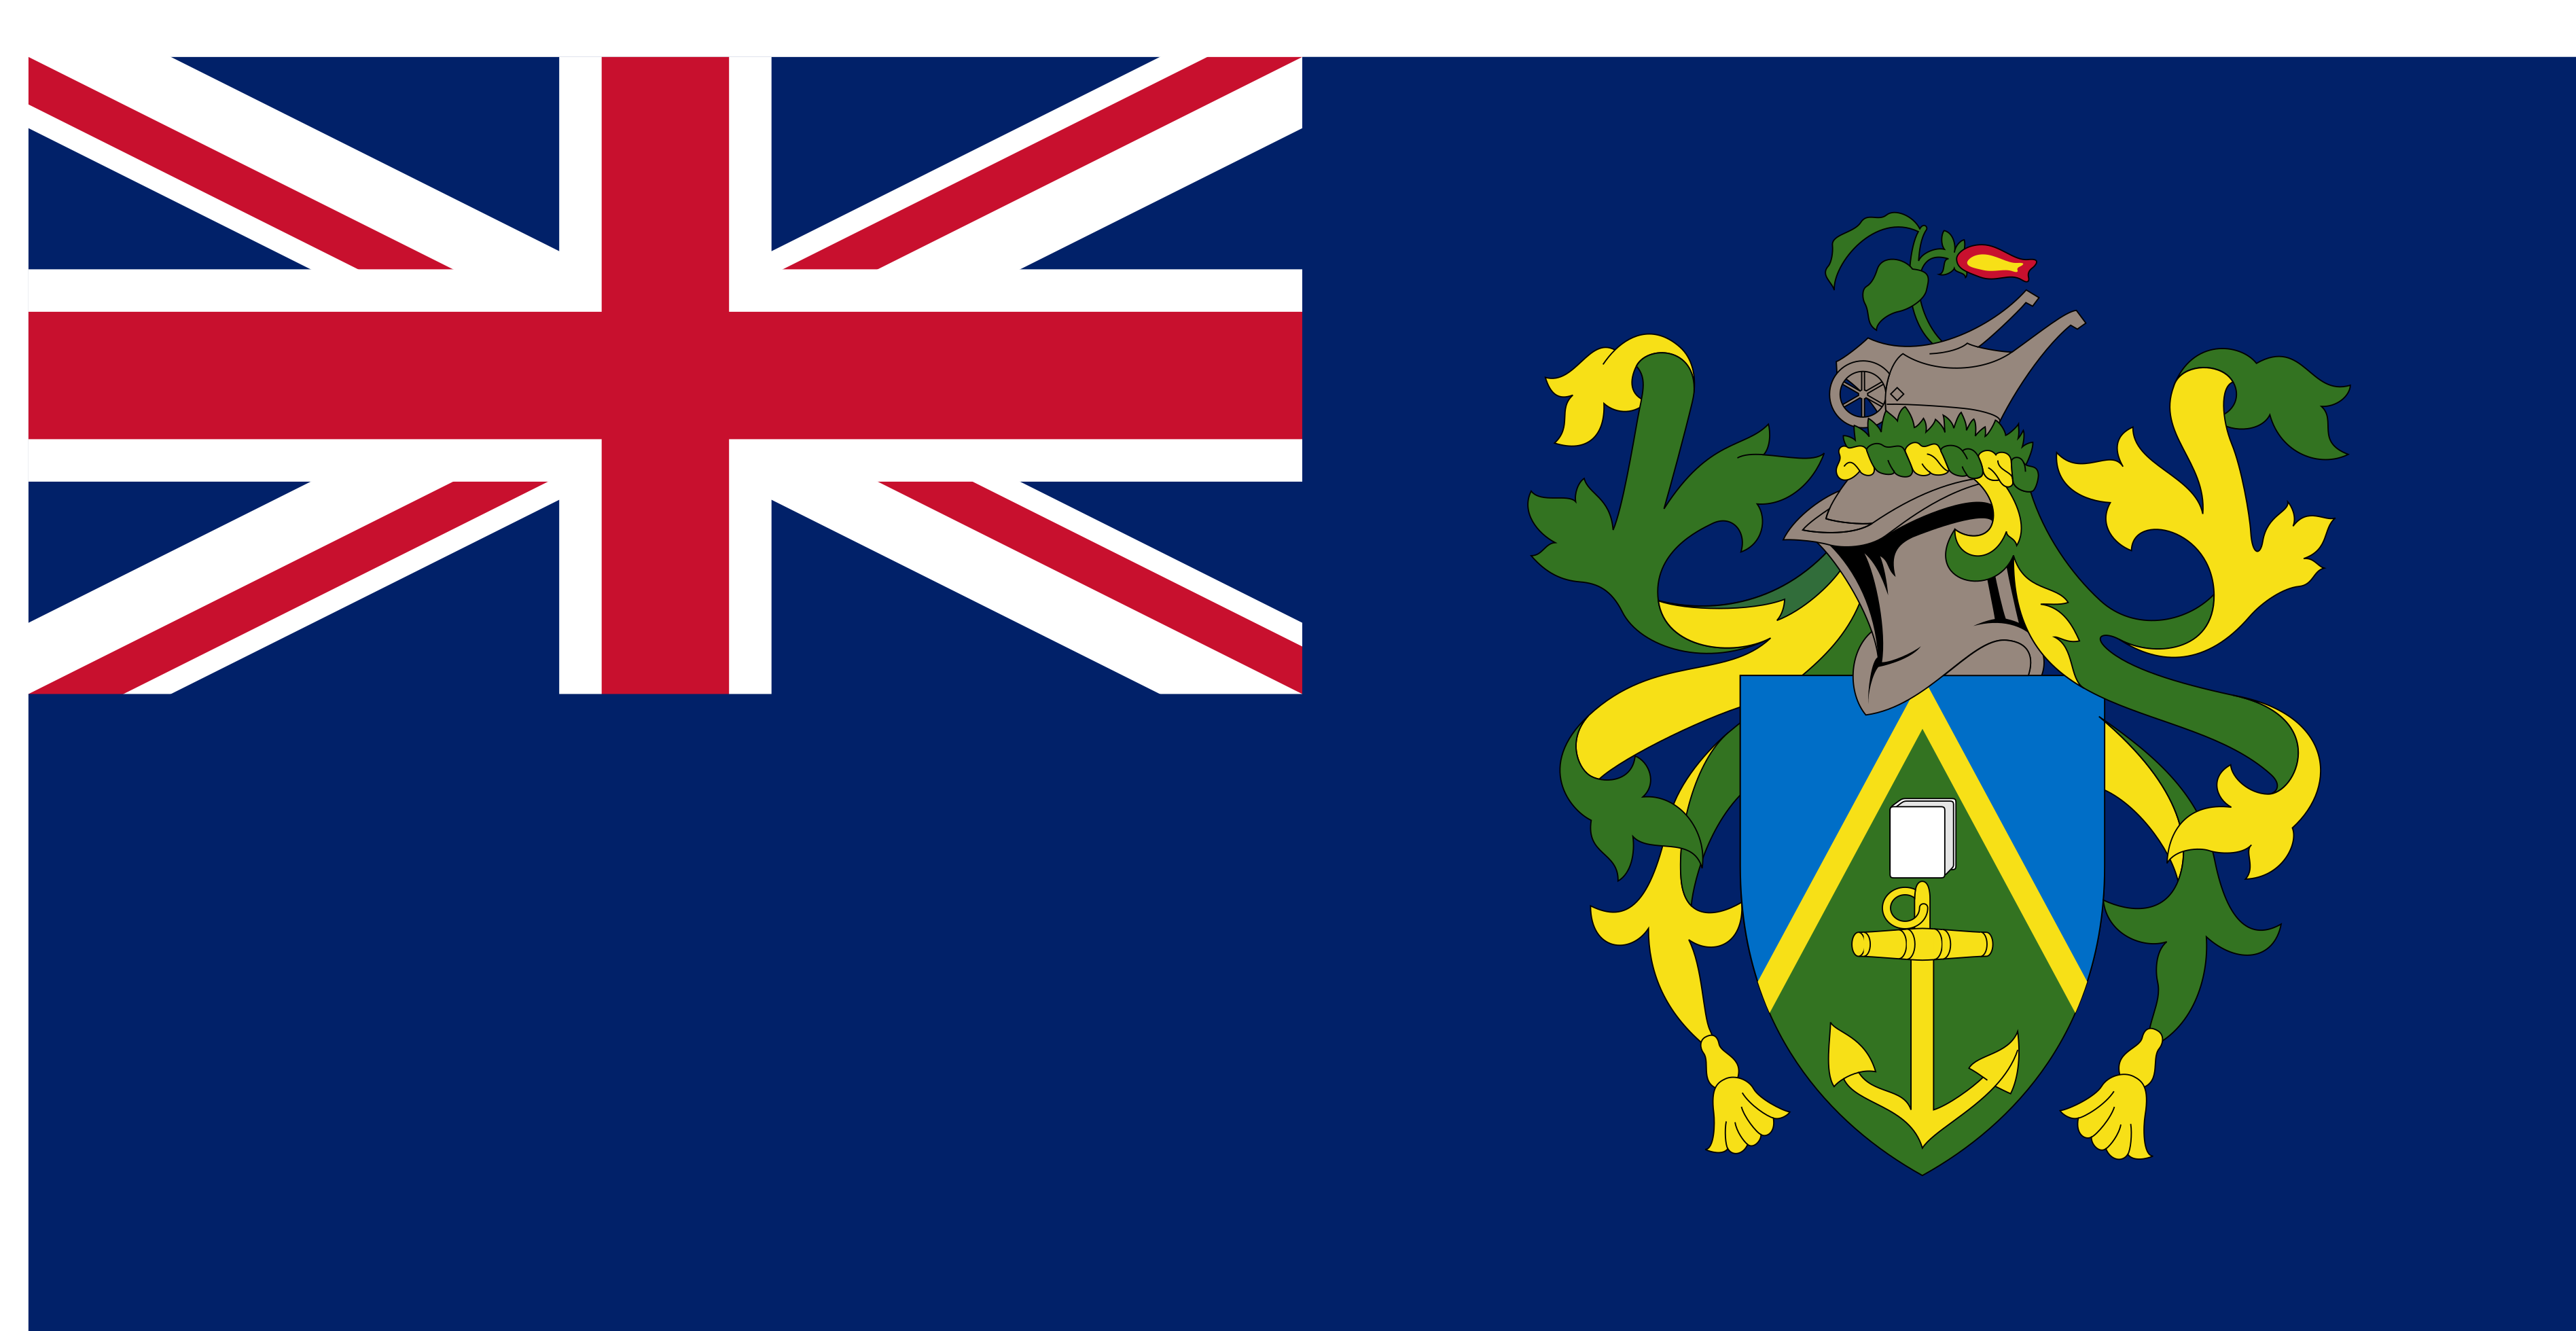 The Pitcairn Islands Flag Image - Free Download